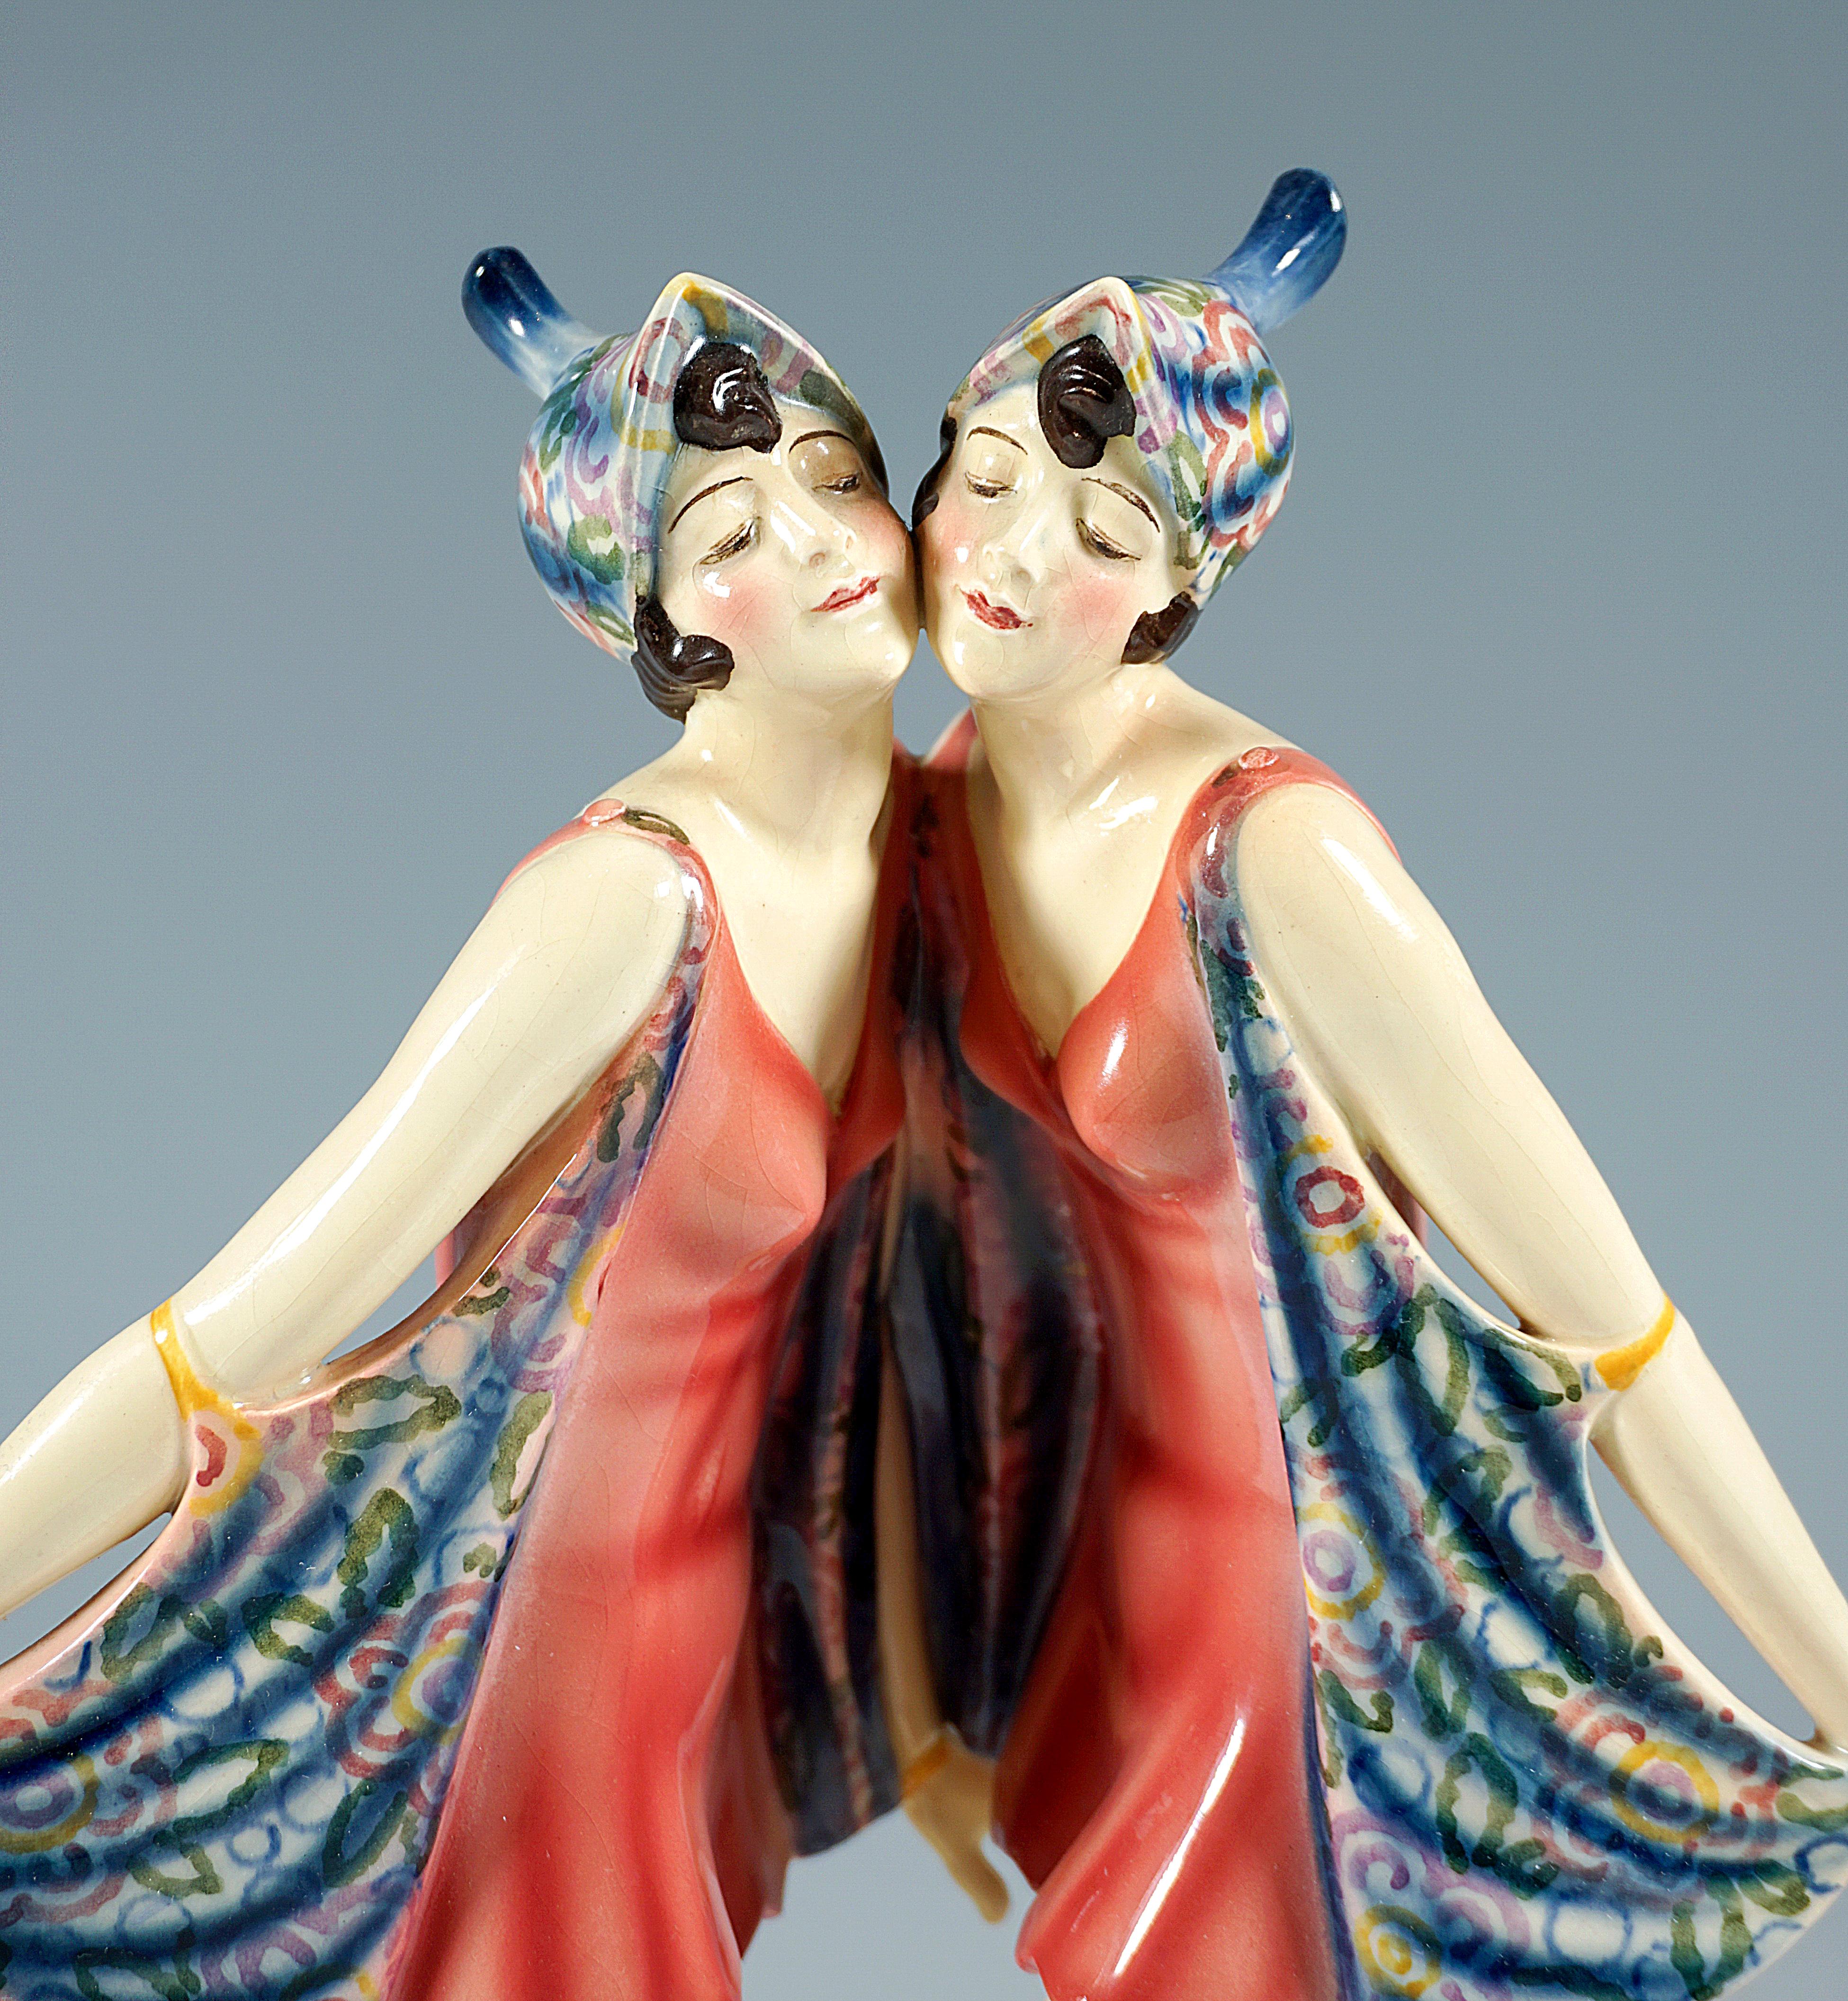 Hand-Crafted Goldscheider Art Déco Dancers, Dolly Sister as 'Turtle Doves', by Dakon, ca 1928